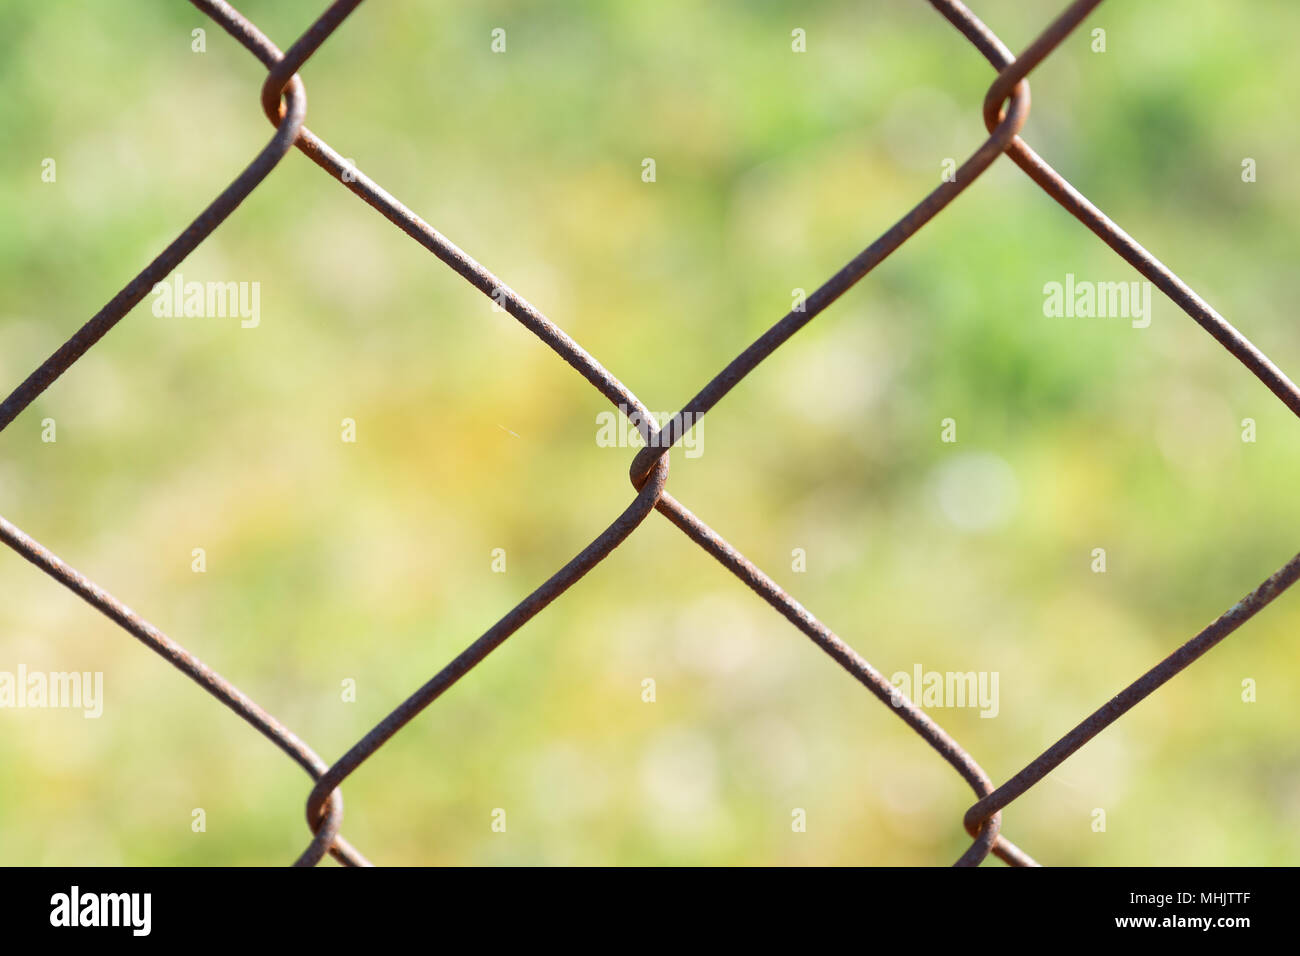 Wire fence with blurred background which is green Stock Photo